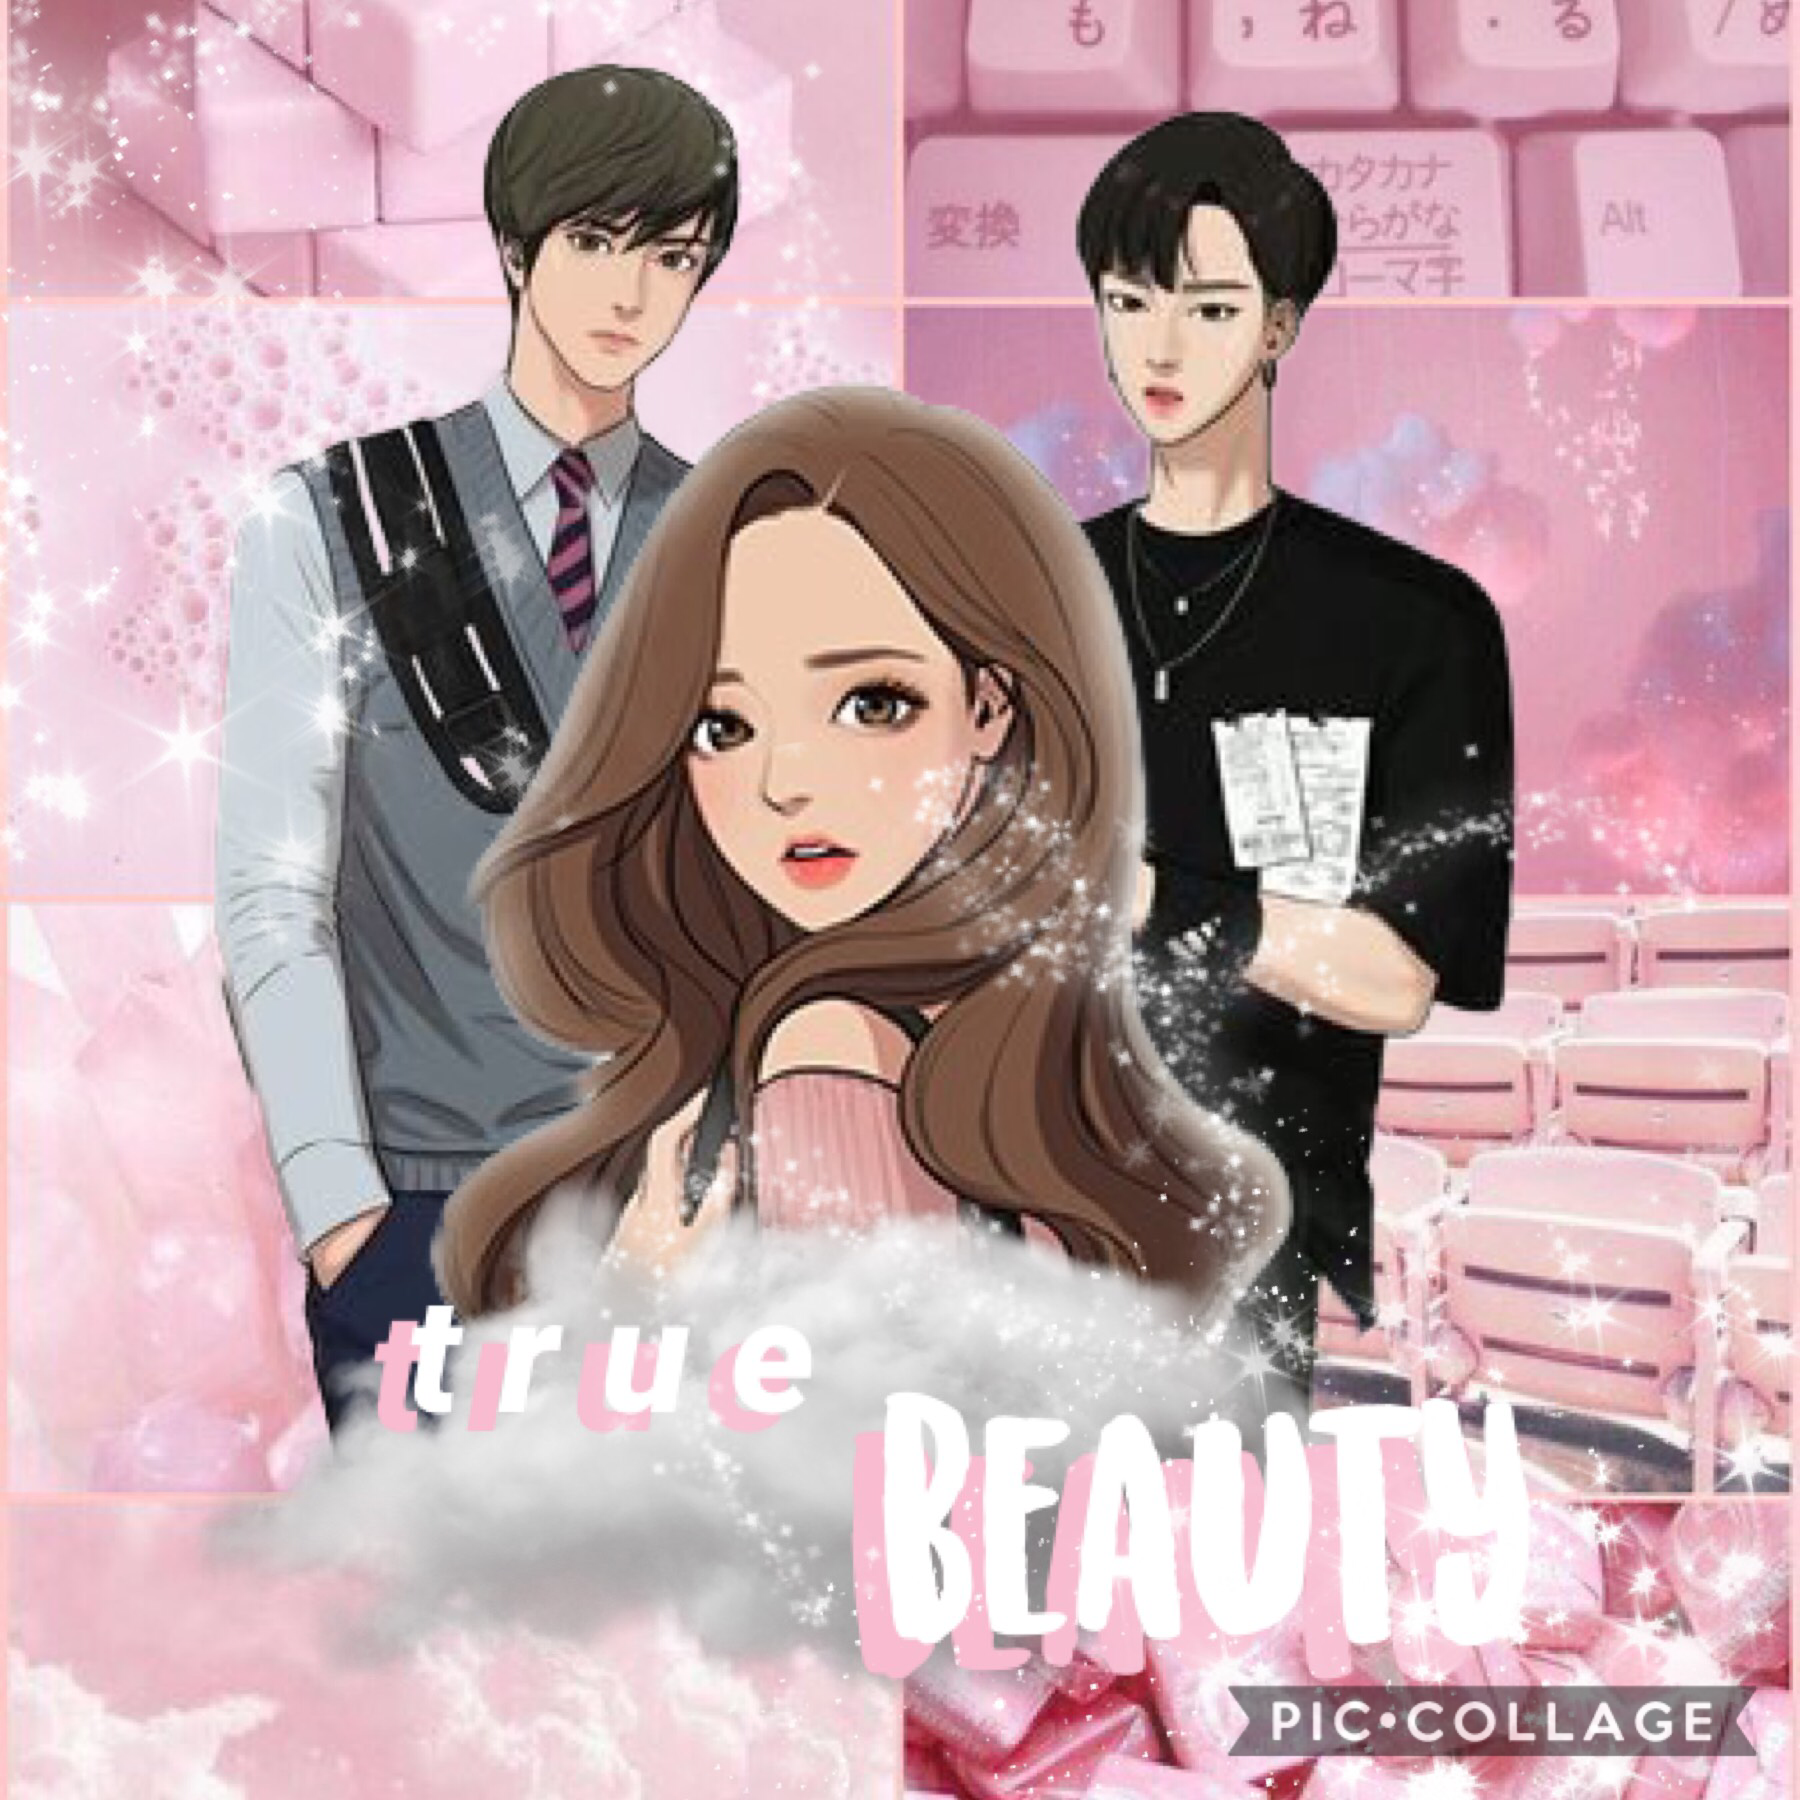 TAP
I AM OBSESSED WITH THIS WEBTOON (True Beauty)
AGH I LOVE IT SO MUCH sorry seojun but I like suho better he gives me more 💞 vibes sry. Also ik I said that would be my last post but this is so... bye....